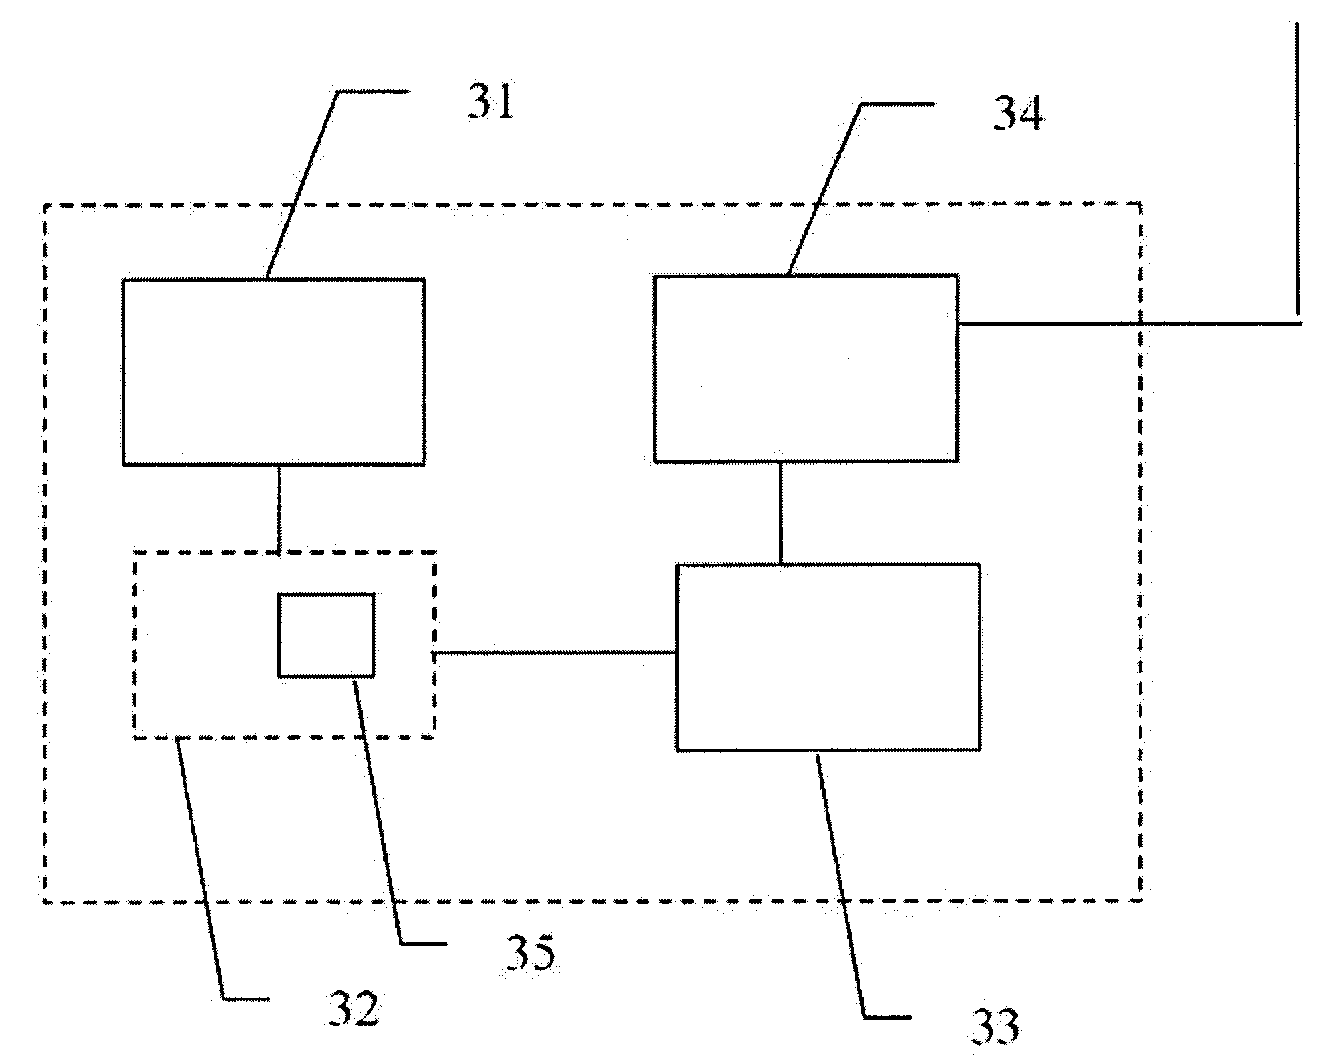 Method for performing active cancellation of inter-cell interference in a cellular wireless access system